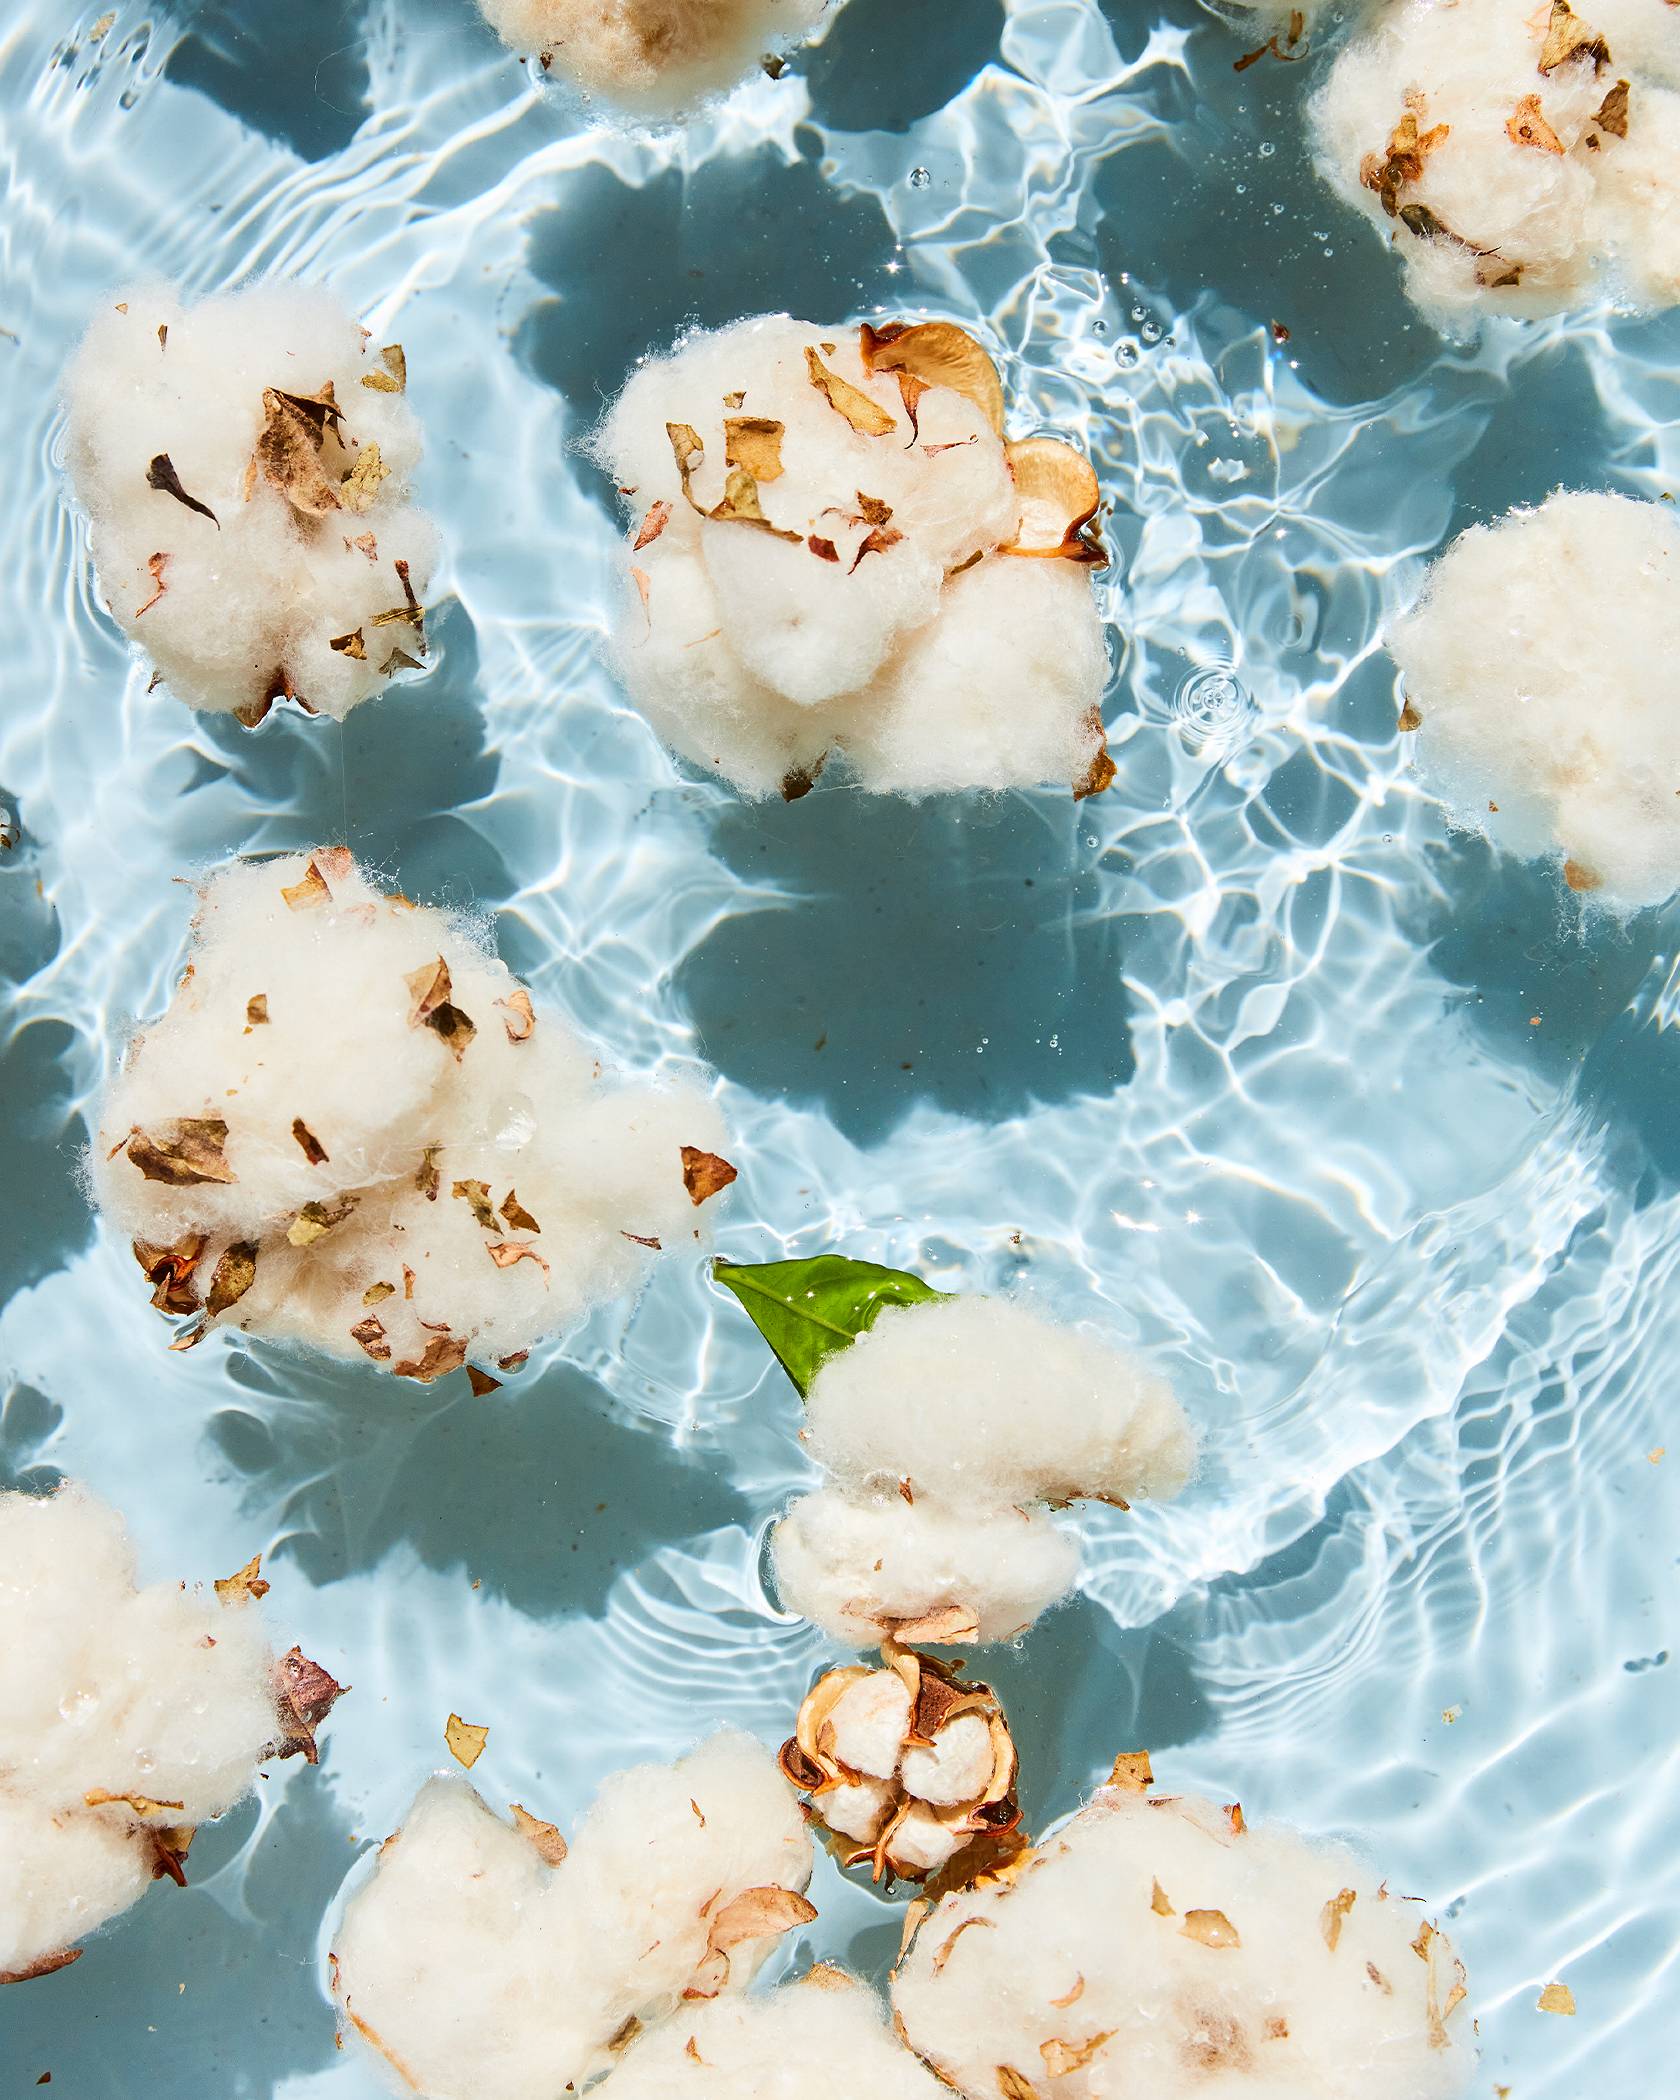 White cotton plant blossoms floating on a bright blue clear water